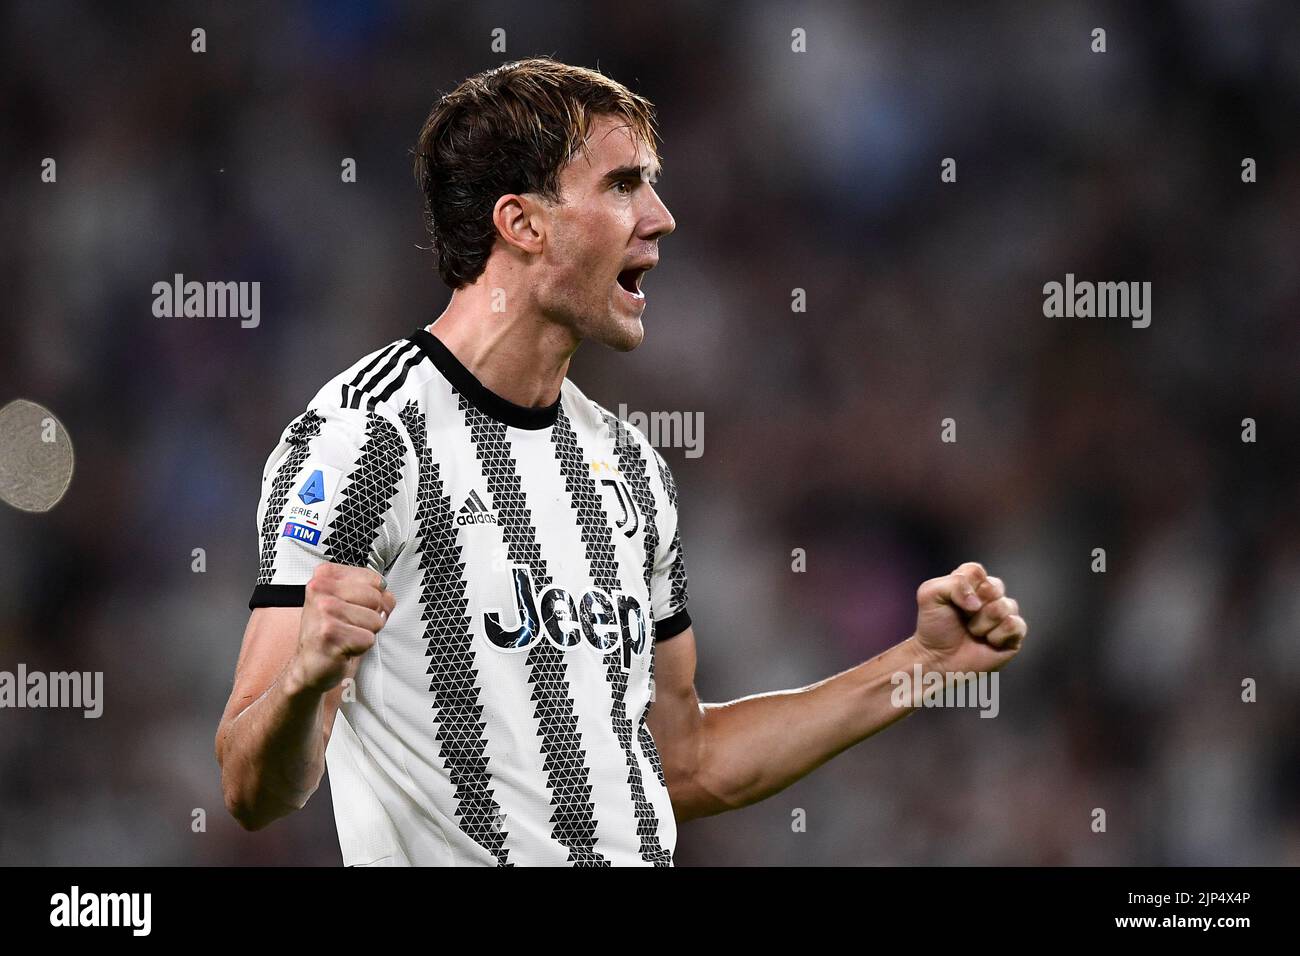 Turin, Italy. 15 August 2022. Dusan Vlahovic of Juventus FC celebrates after scoring a goal during the Serie A football match between Juventus FC and US Sassuolo. Credit: Nicolò Campo/Alamy Live News Stock Photo